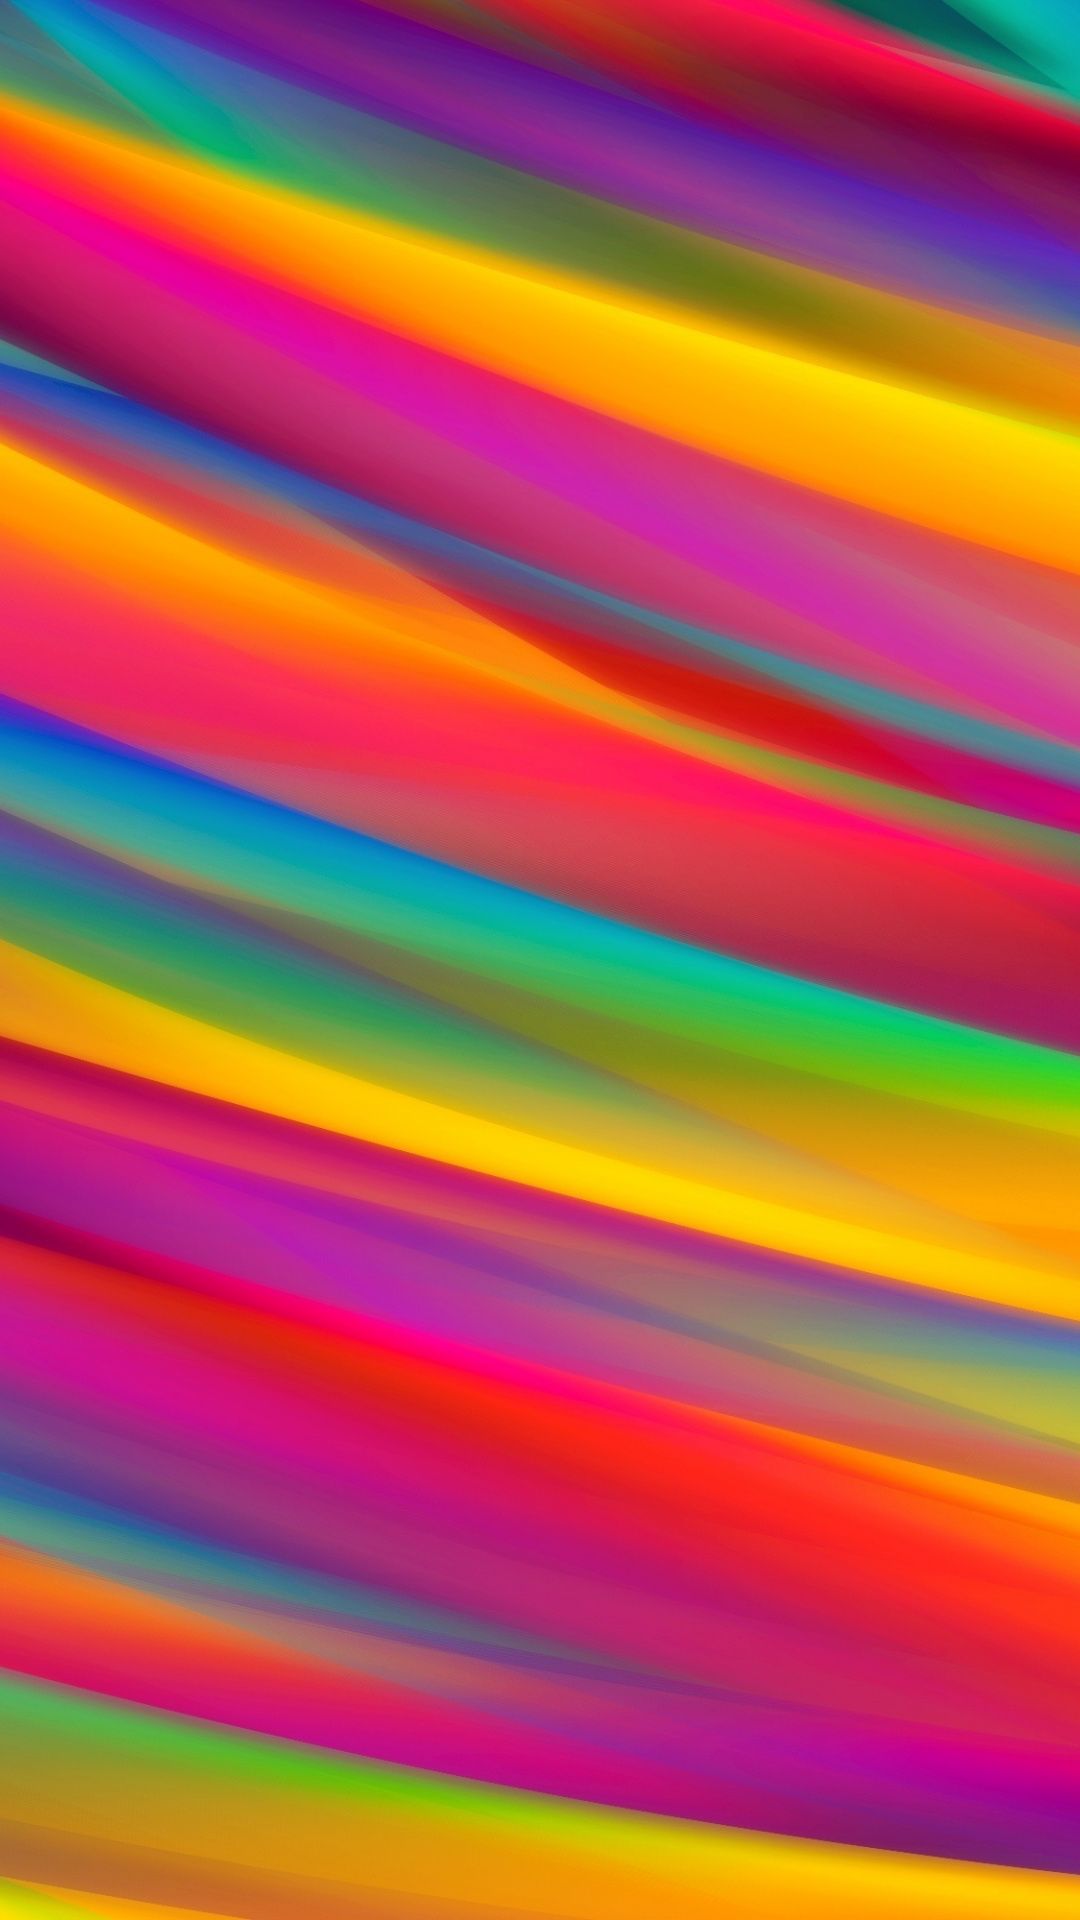 Shining curves, abstract, colorful, 1080x1920 wallpaper. Abstract